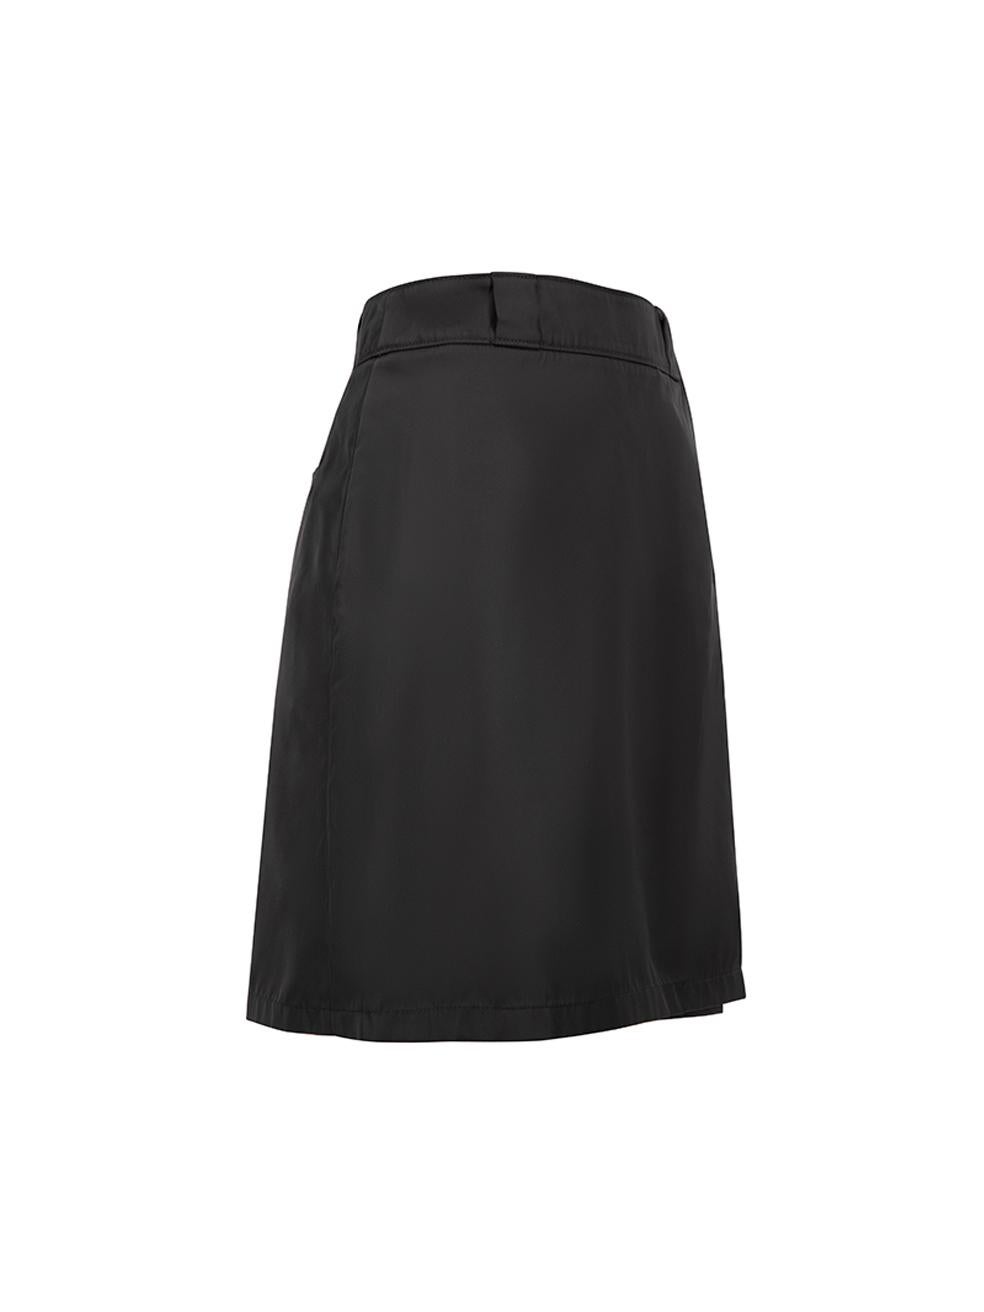 CONDITION is Very good. Hardly any visible wear to skirt is evident on this used Prada designer resale item. Details Black Synthetic Mini skirt Wrap front with clasps and button closure Belt hoops Back welt pockets Made in Romania Composition 100%